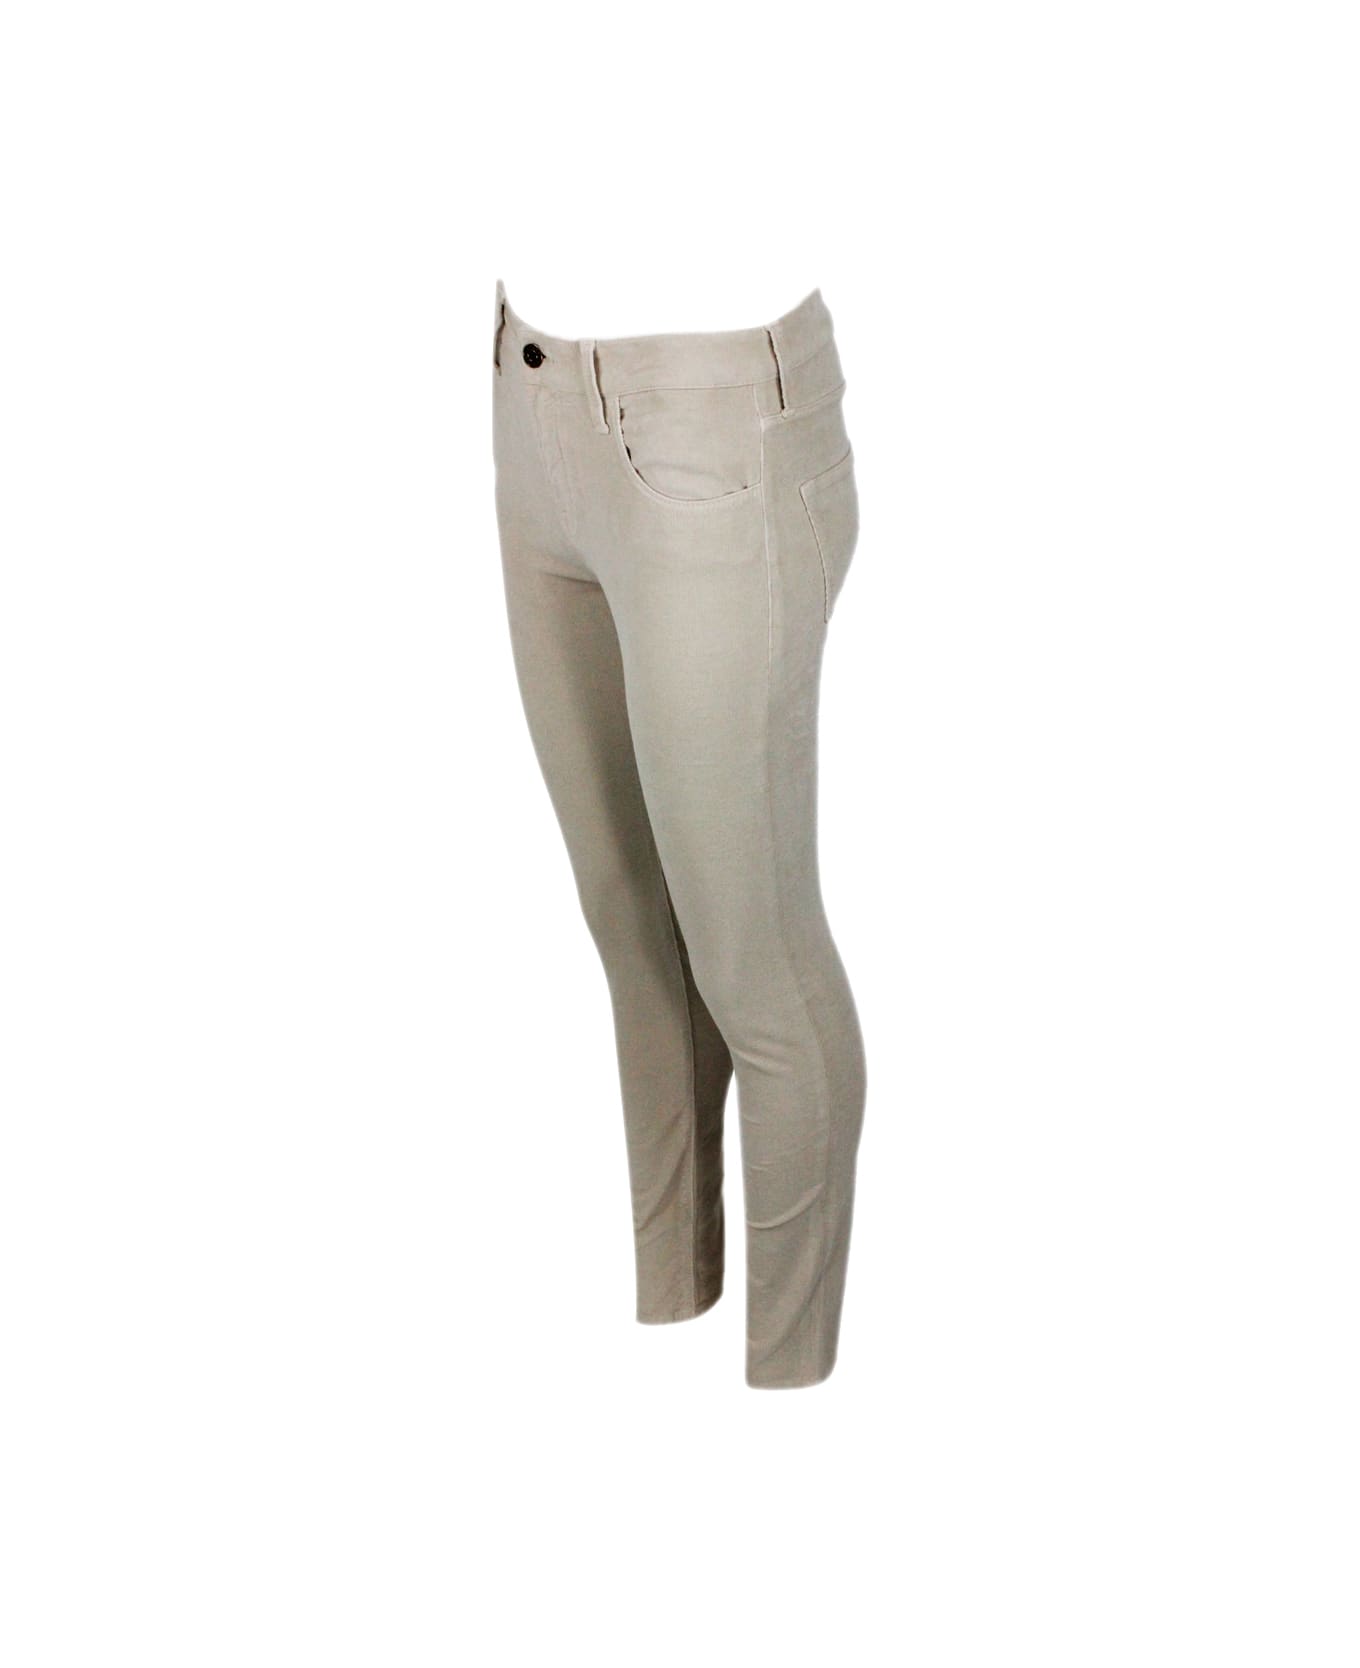 Jacob Cohen Kimberly Trousers With Cigarette Cuts In Soft Velvet A Thousand Lines With 5 Pockets - Beige